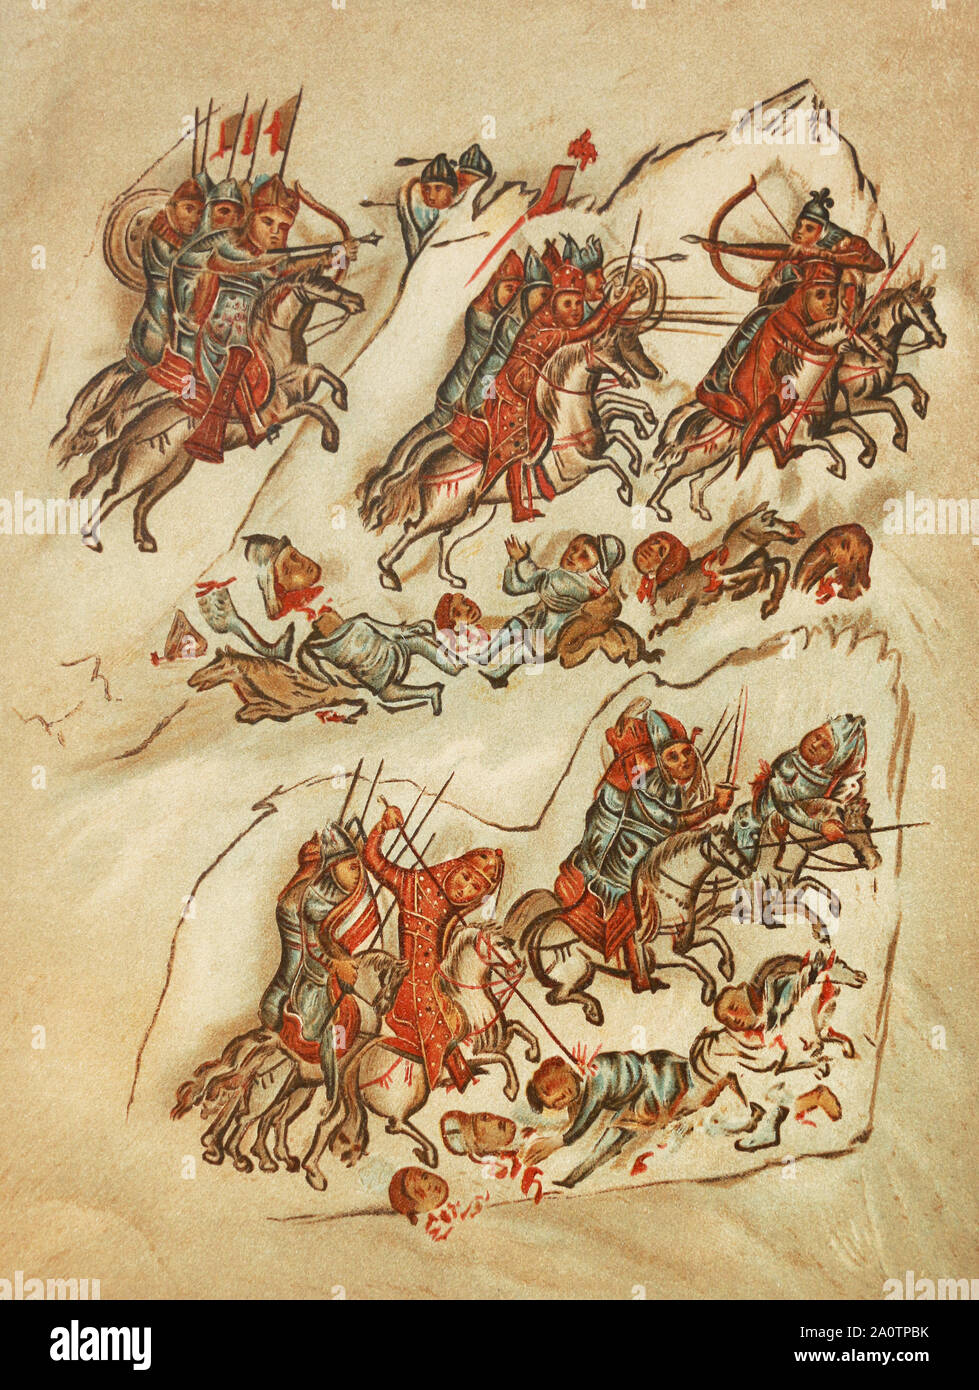 The battle between the Russian and Bulgarian riders in the 10th century. Medieval miniature. Stock Photo